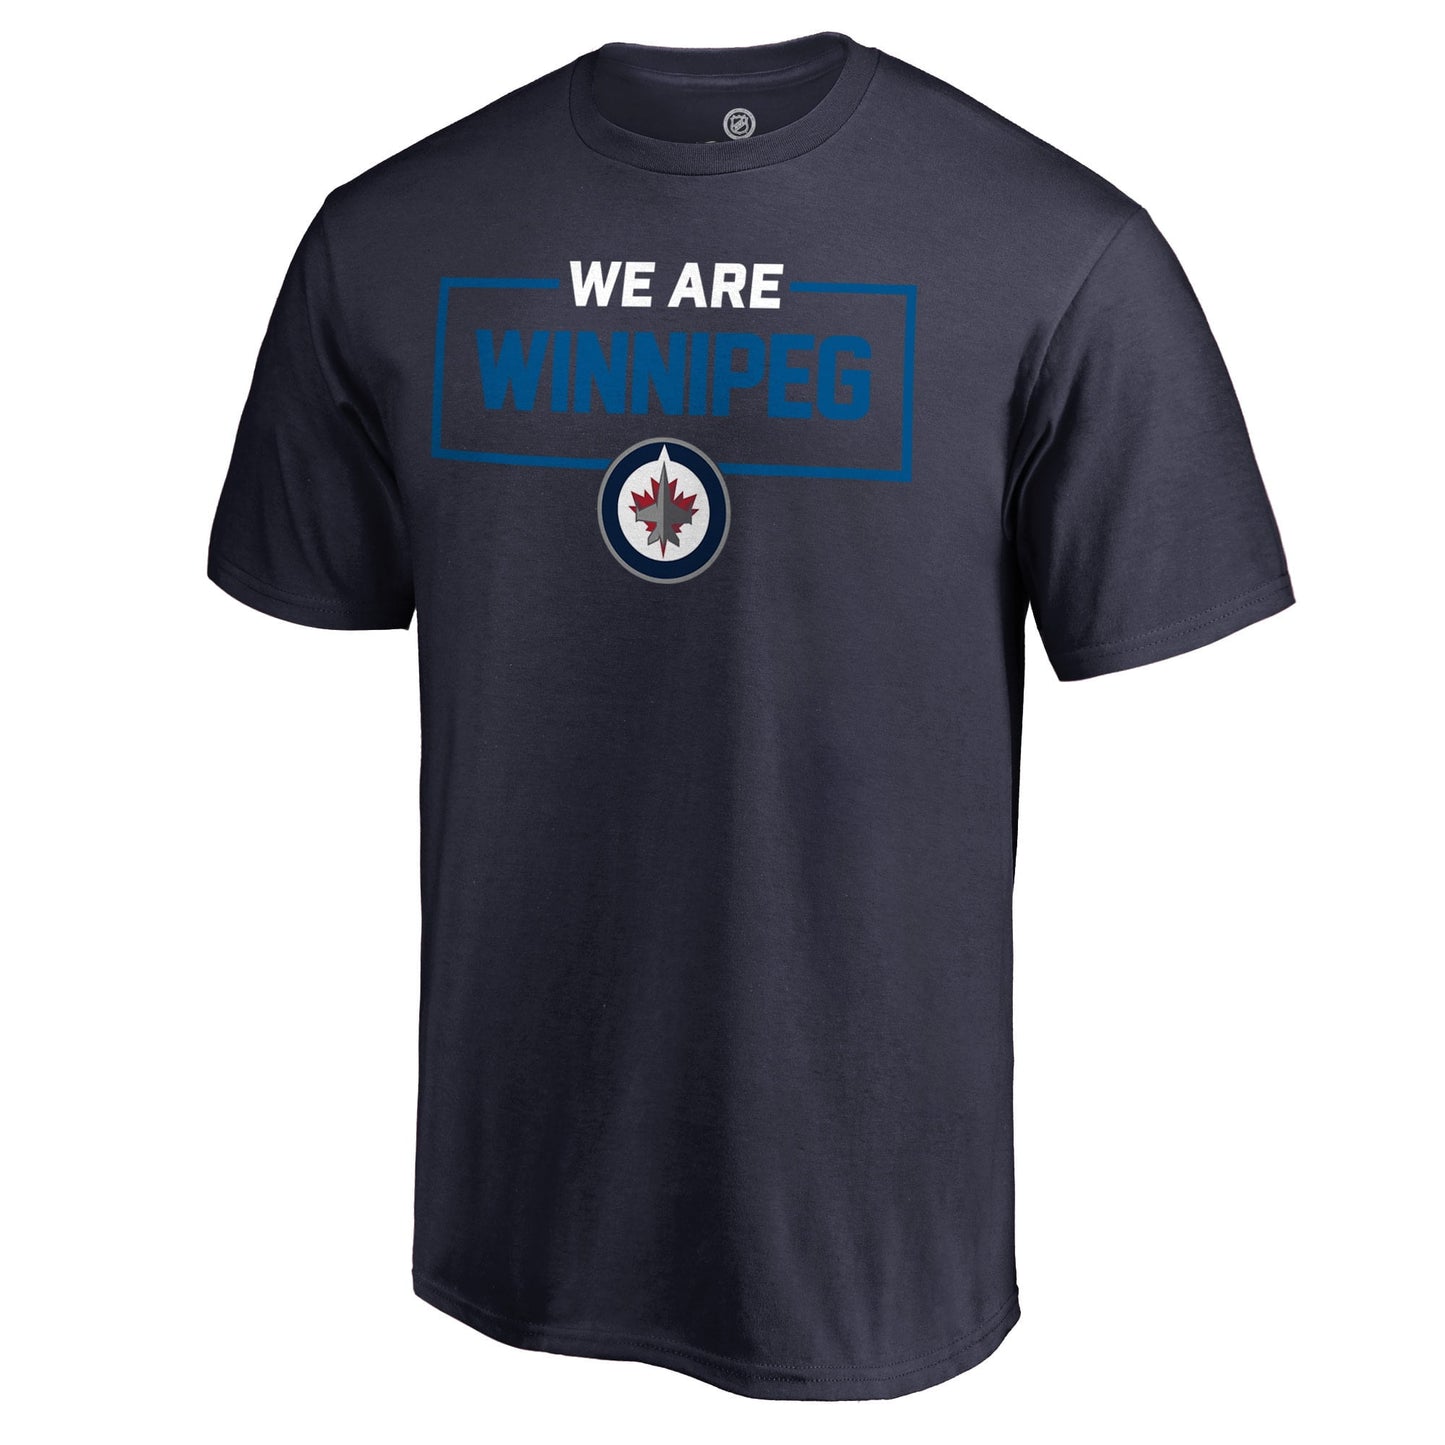 Men's Fanatics Branded Navy Winnipeg Jets Iconic Collection We Are T-Shirt